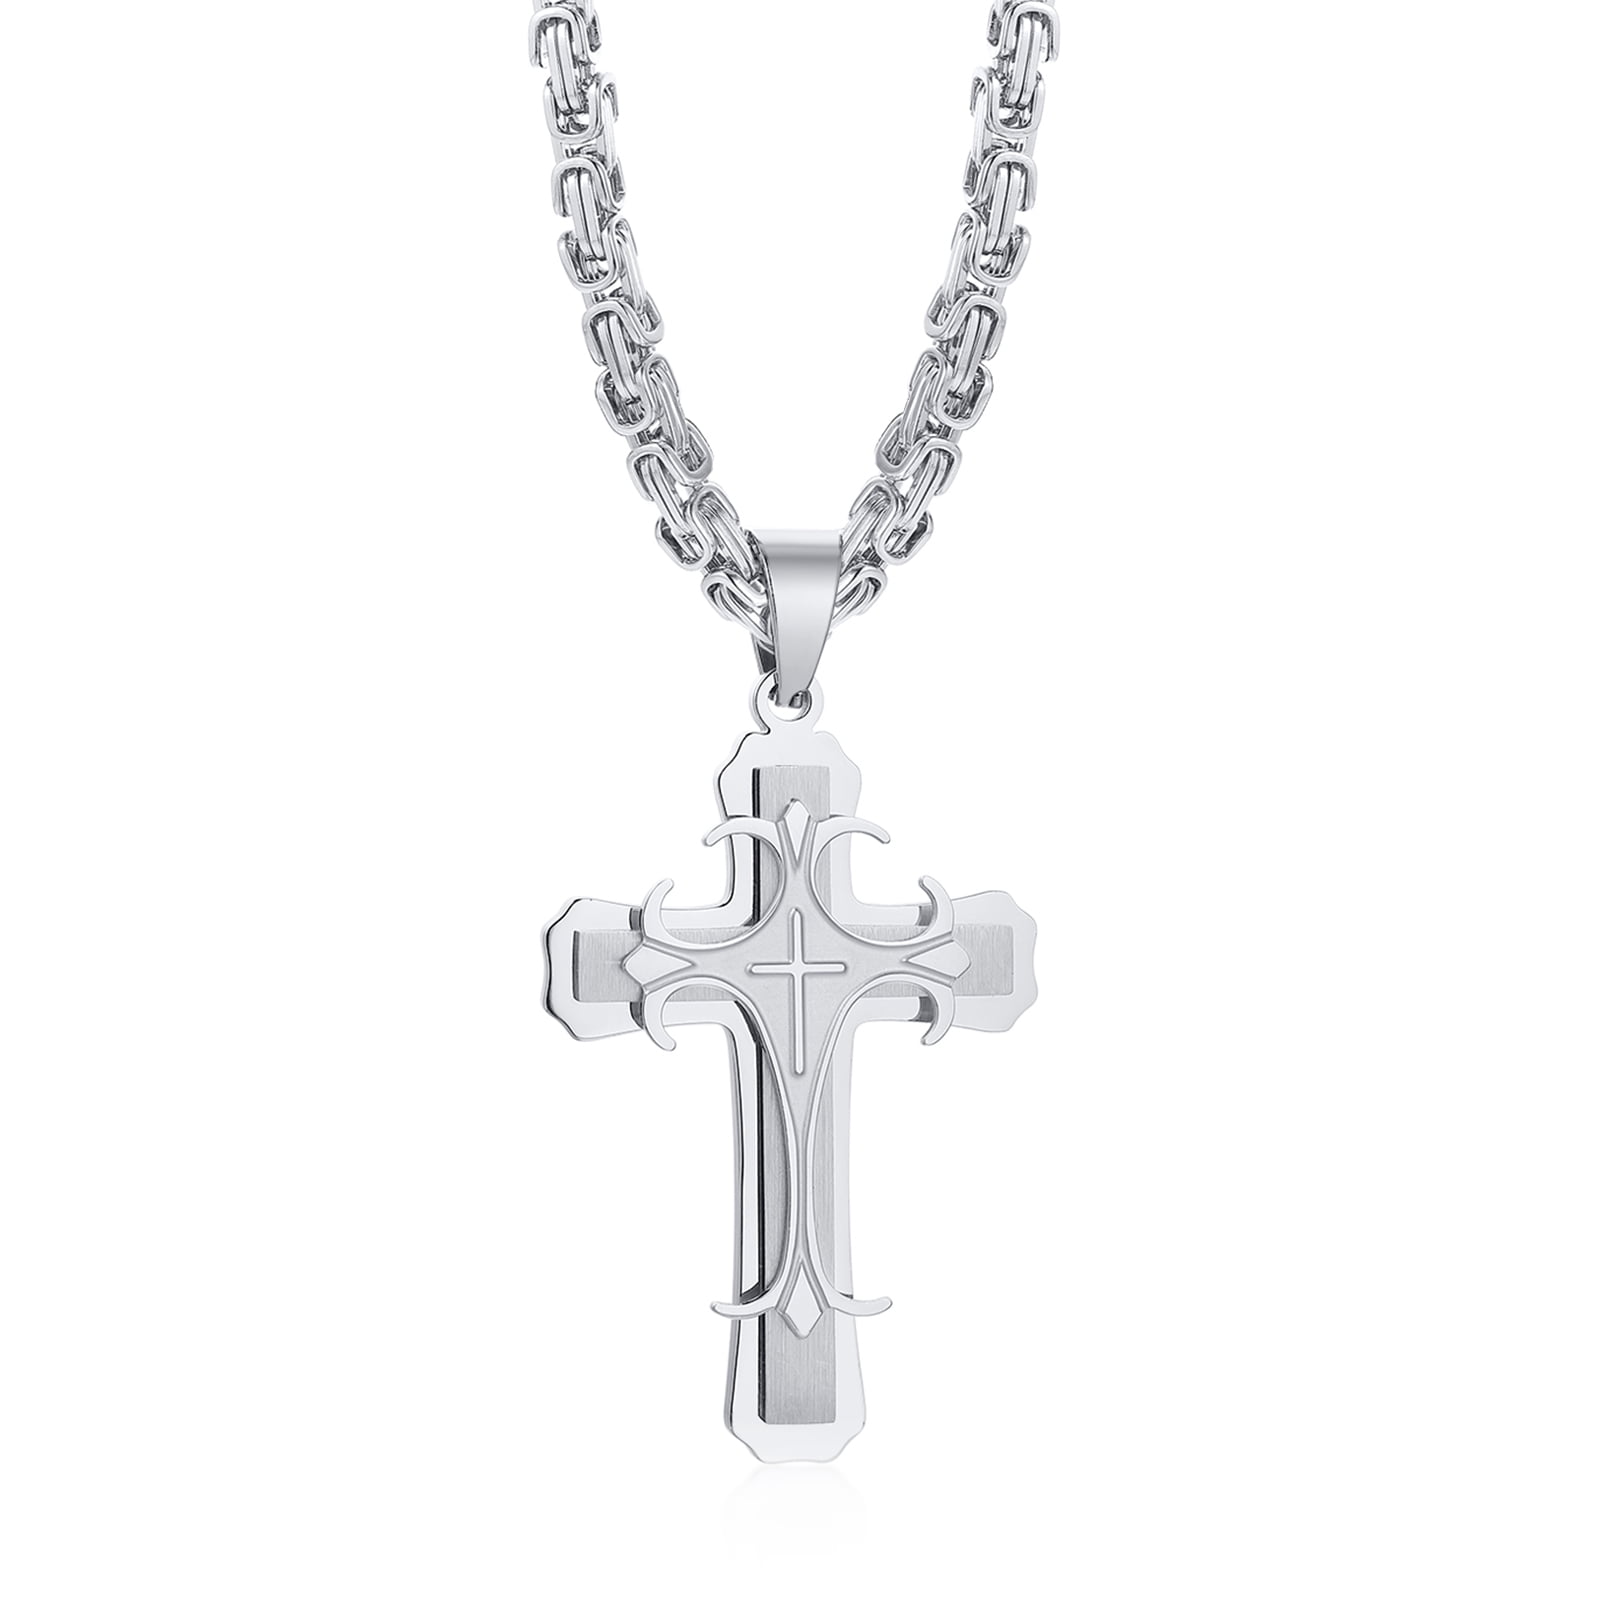 Stainless Steel Men Gold Silver Black Cross Pendant Byzantine Chain Necklace C2 